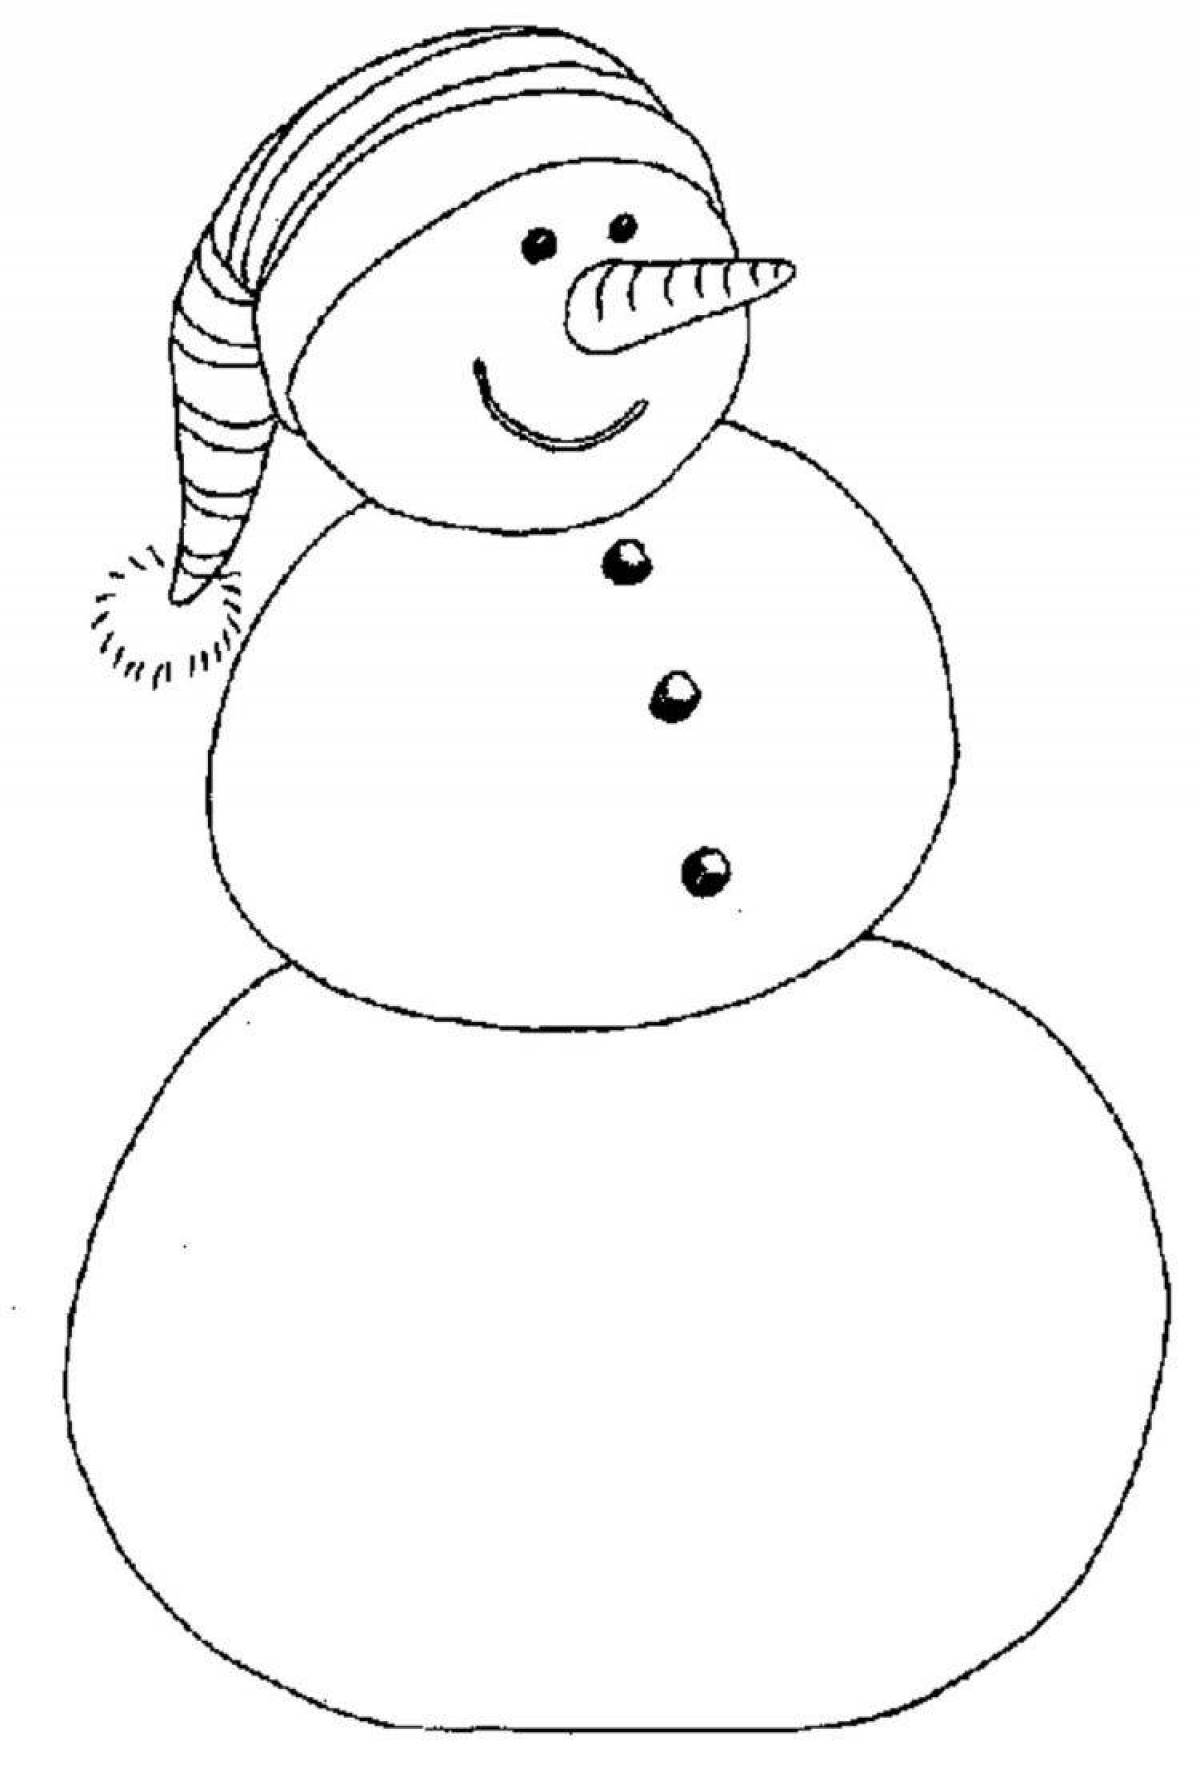 Adorable snowman drawing